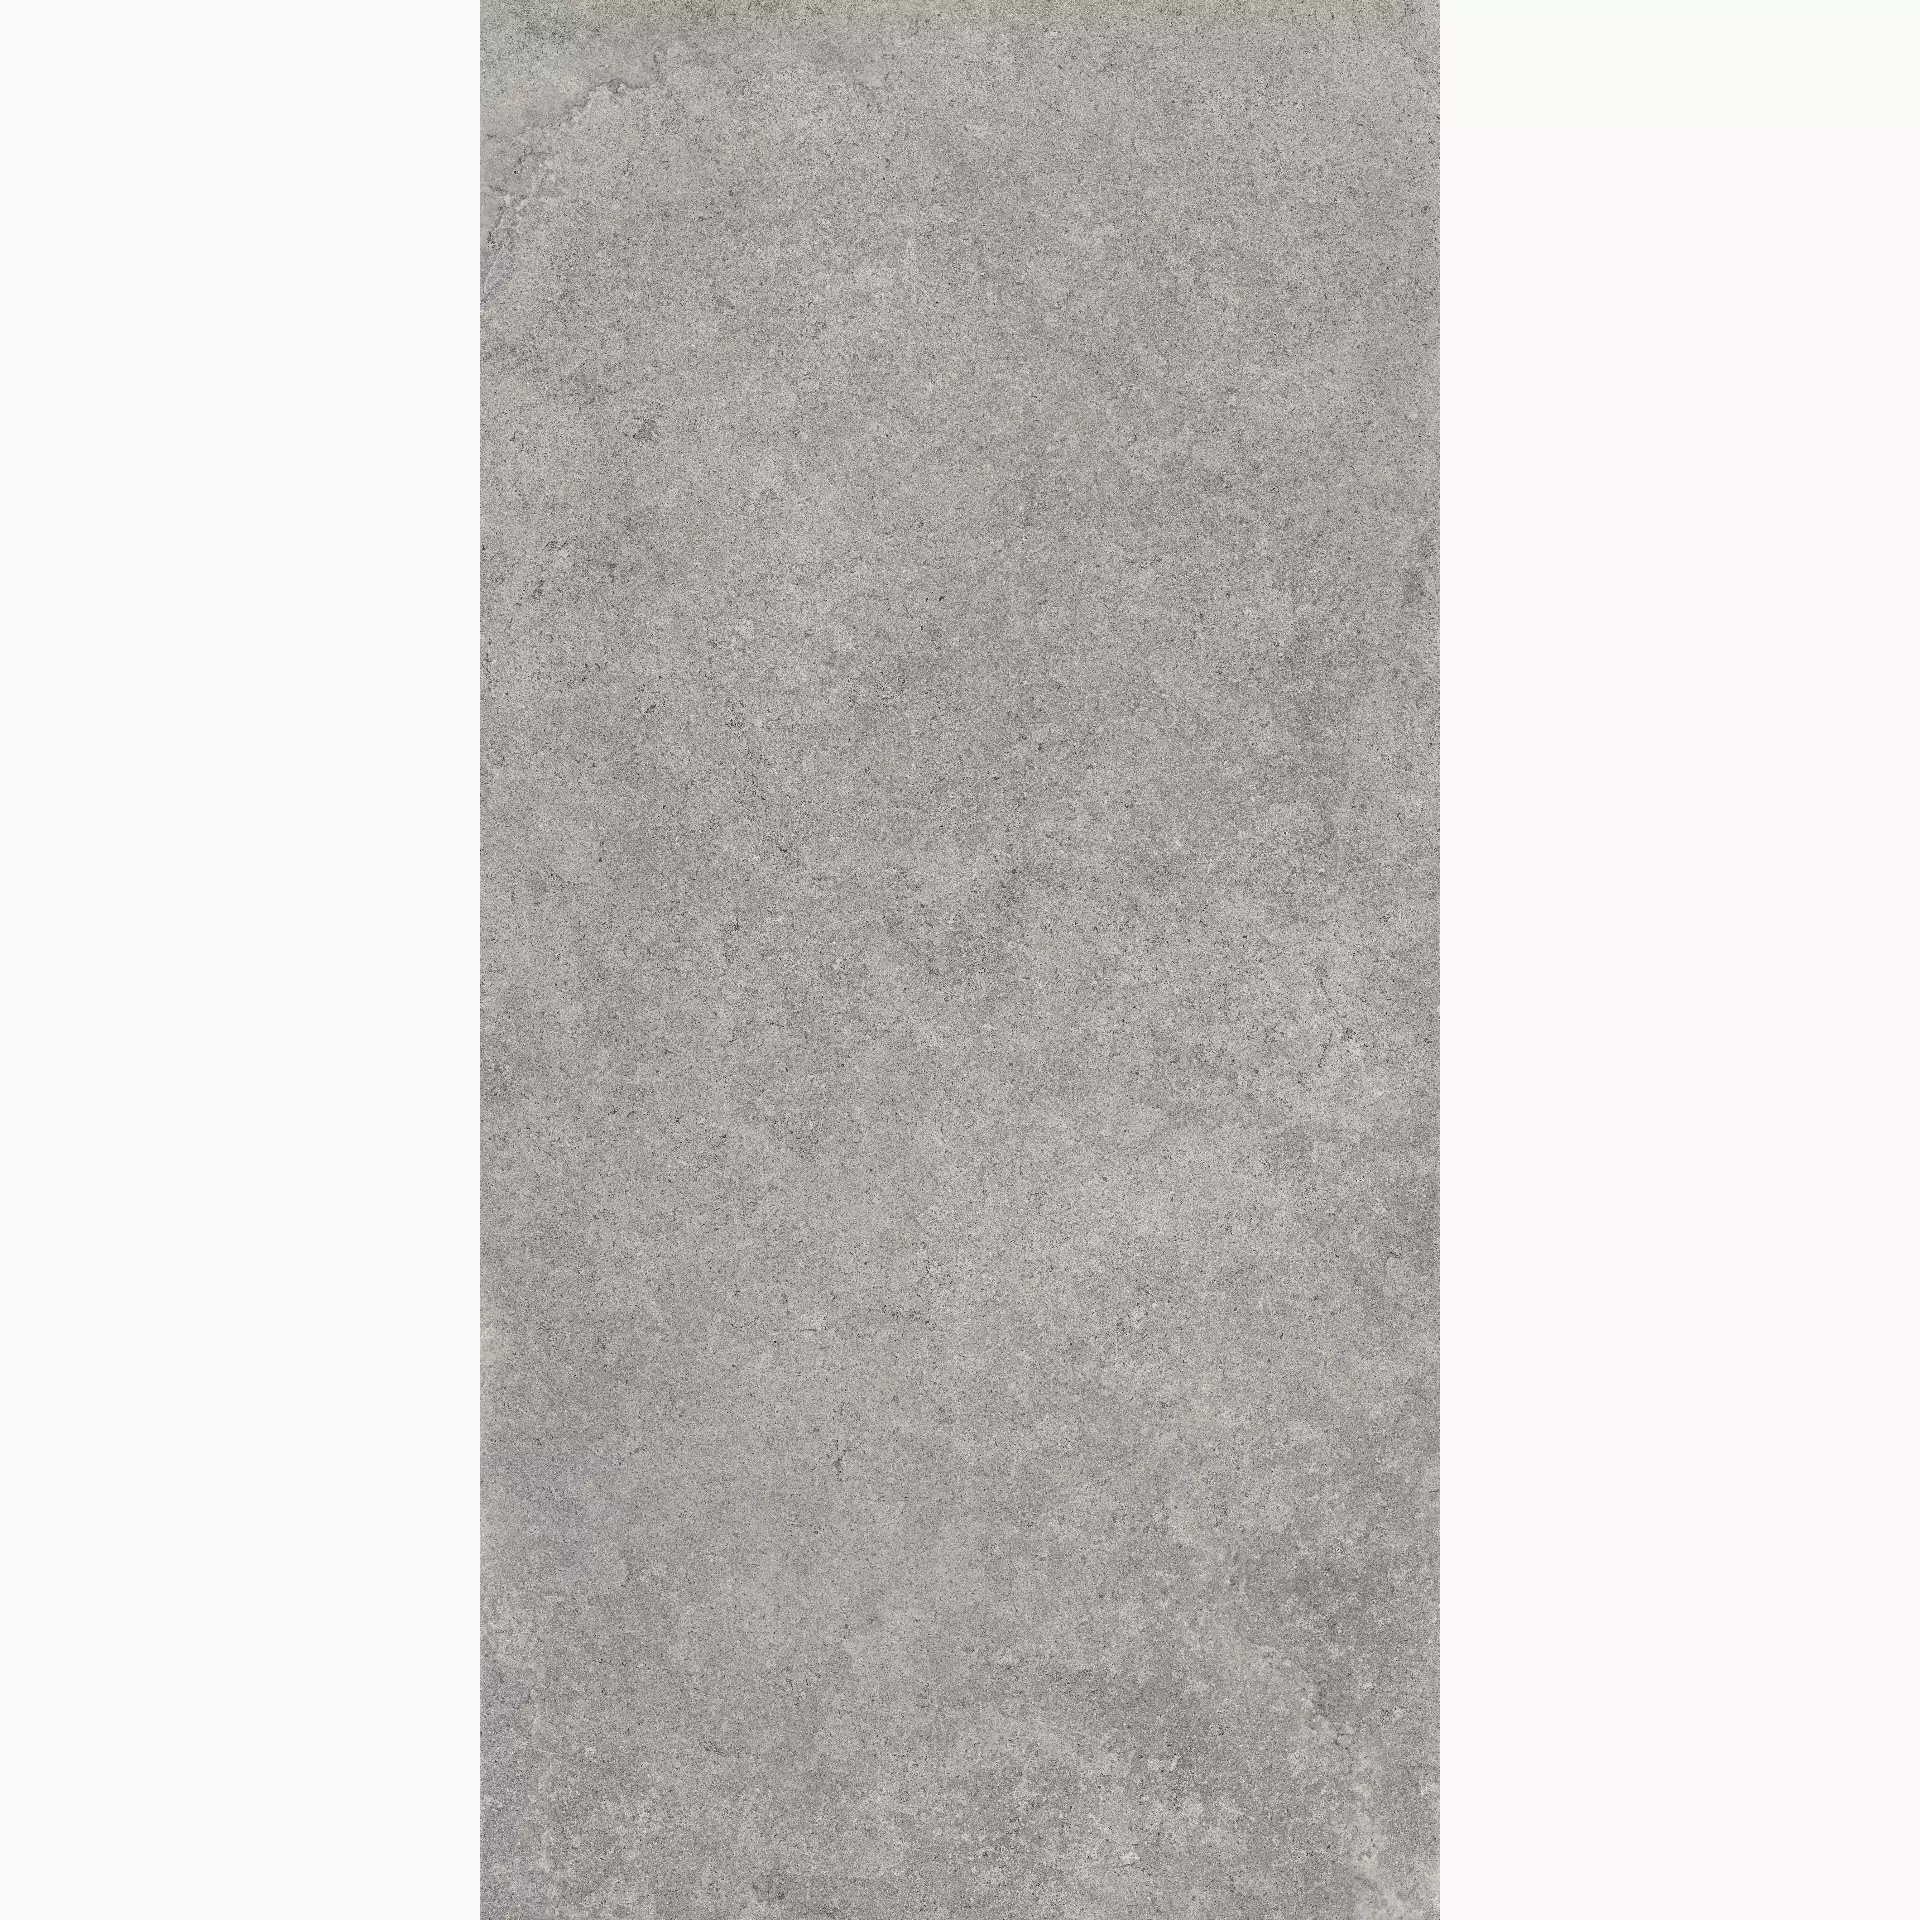 Cottodeste Pura Grey Honed Protect EGXPRH0 60x120cm rectified 14mm